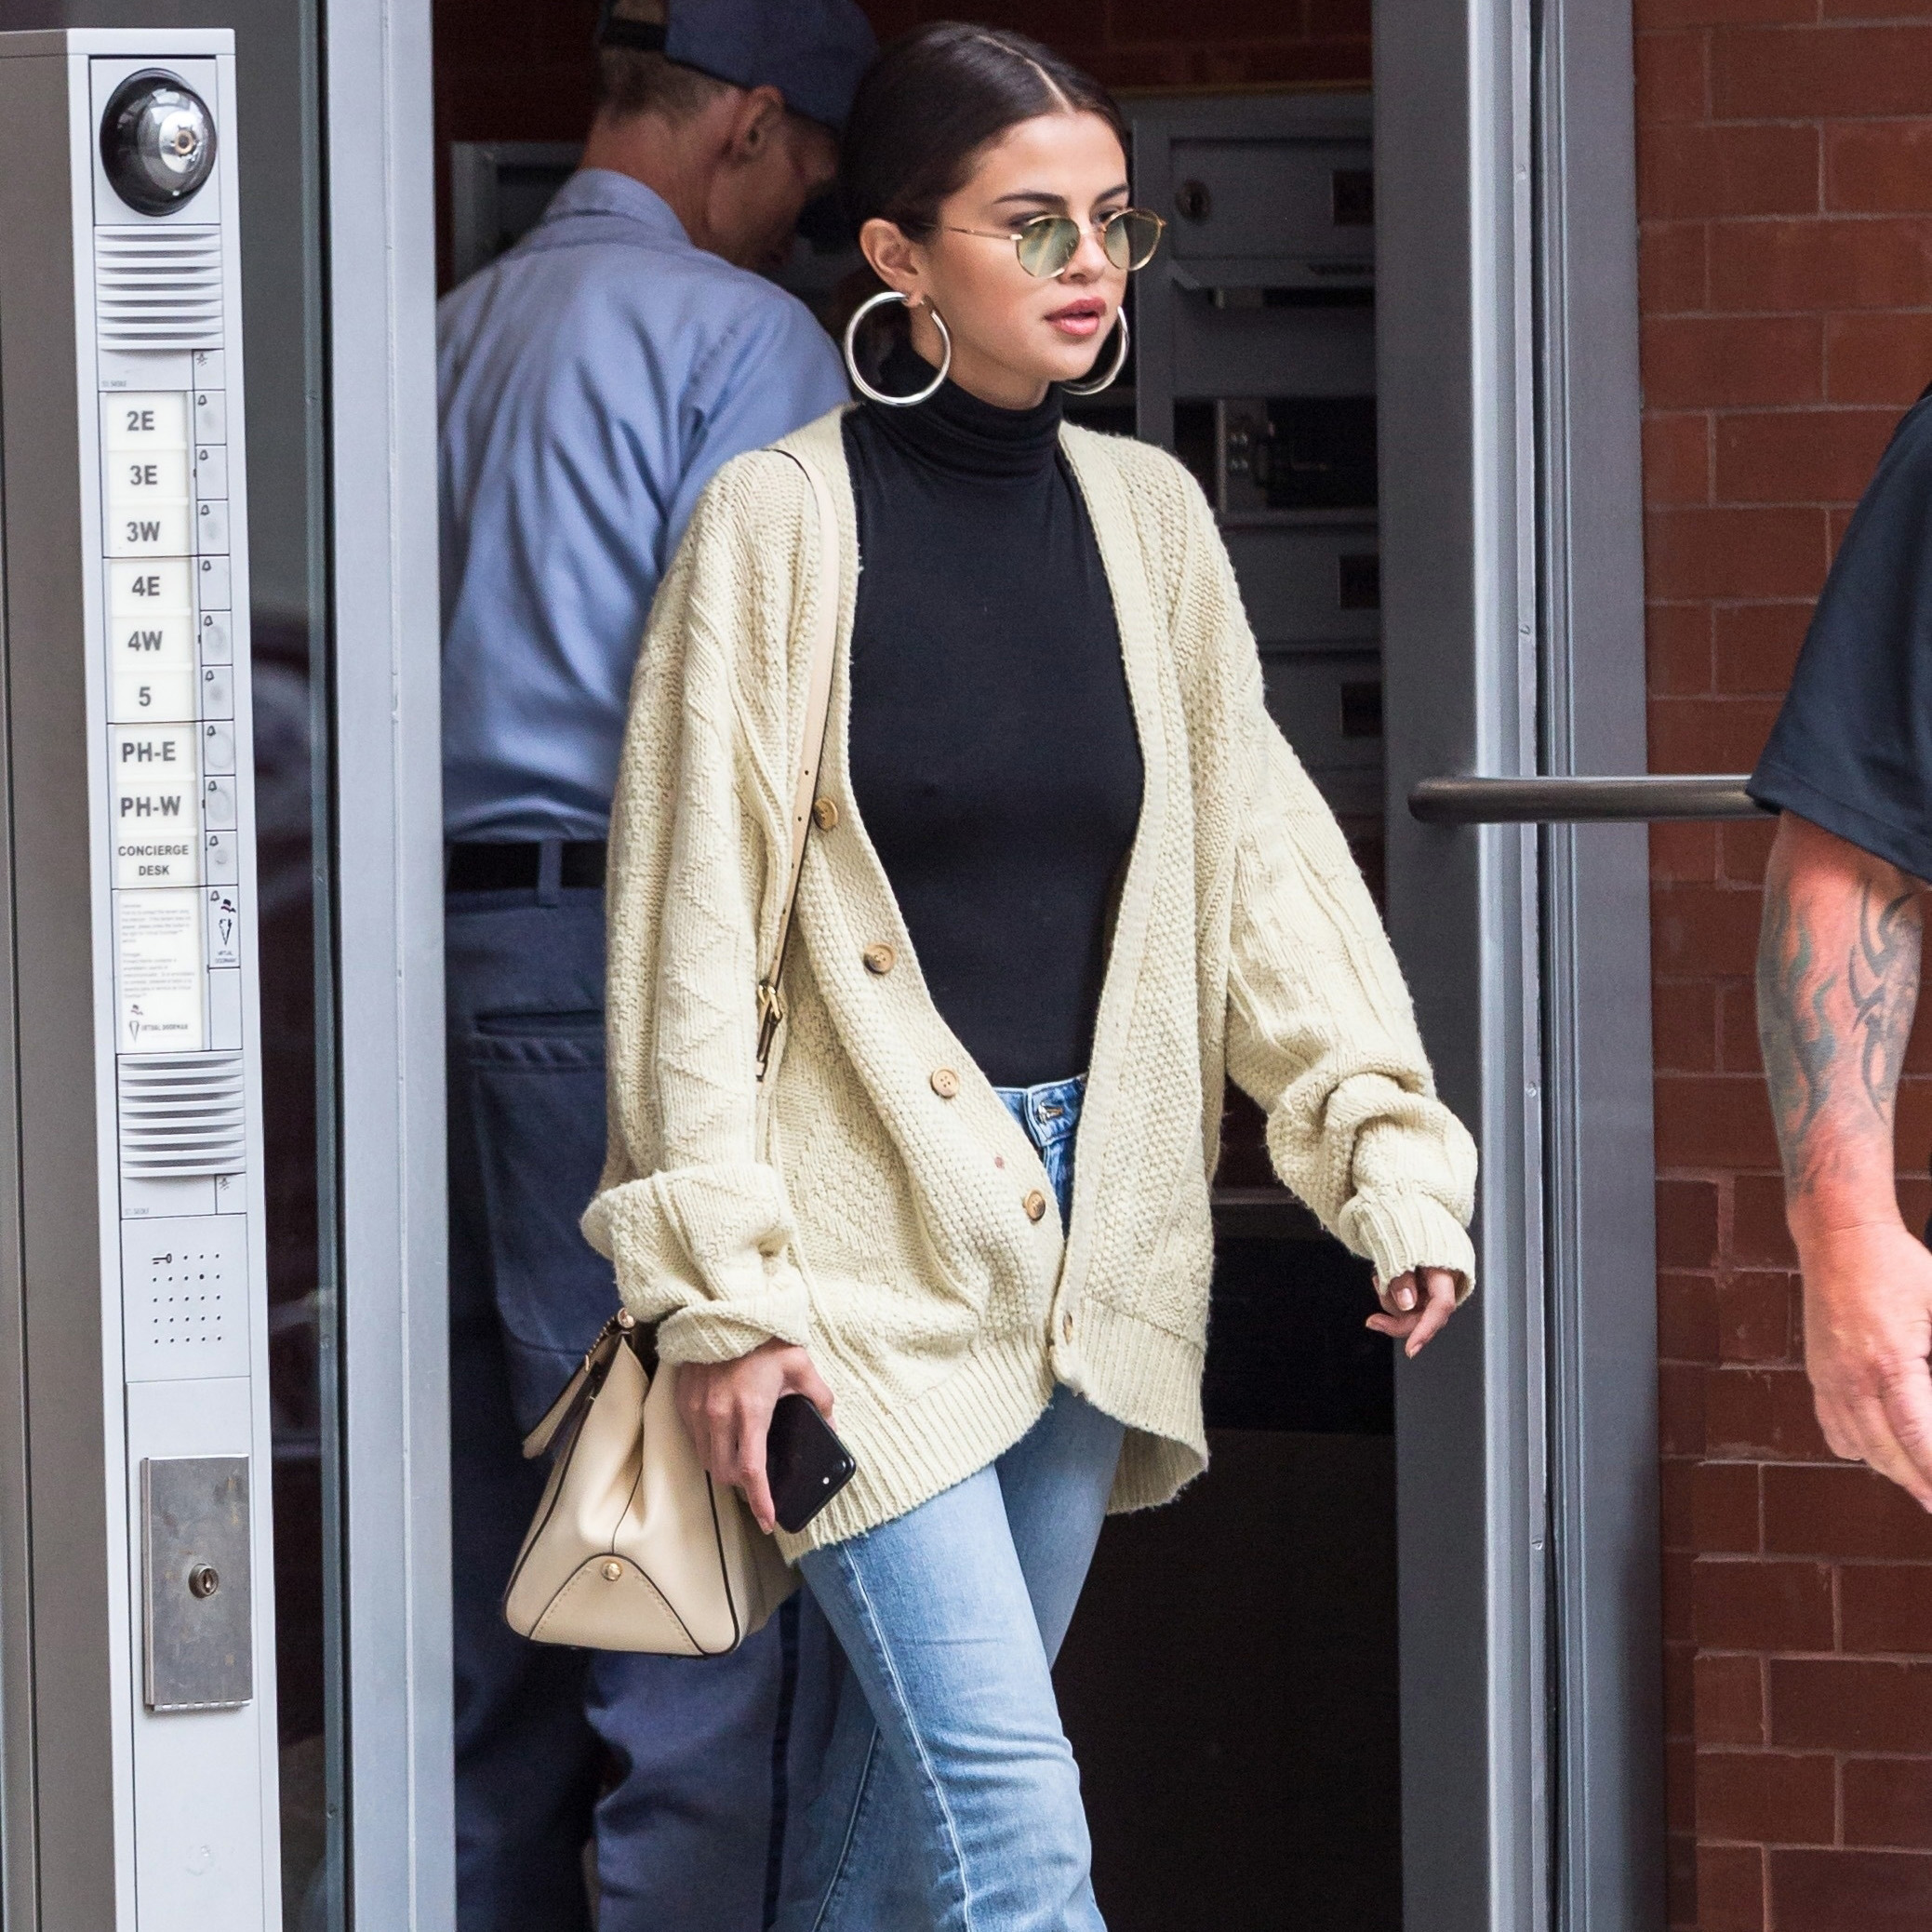 Selena Gomez Proves Why the Best Athleisure Doesn't Stop at the Neck   Selena gomez street style, Selena gomez outfits, Selena gomez style